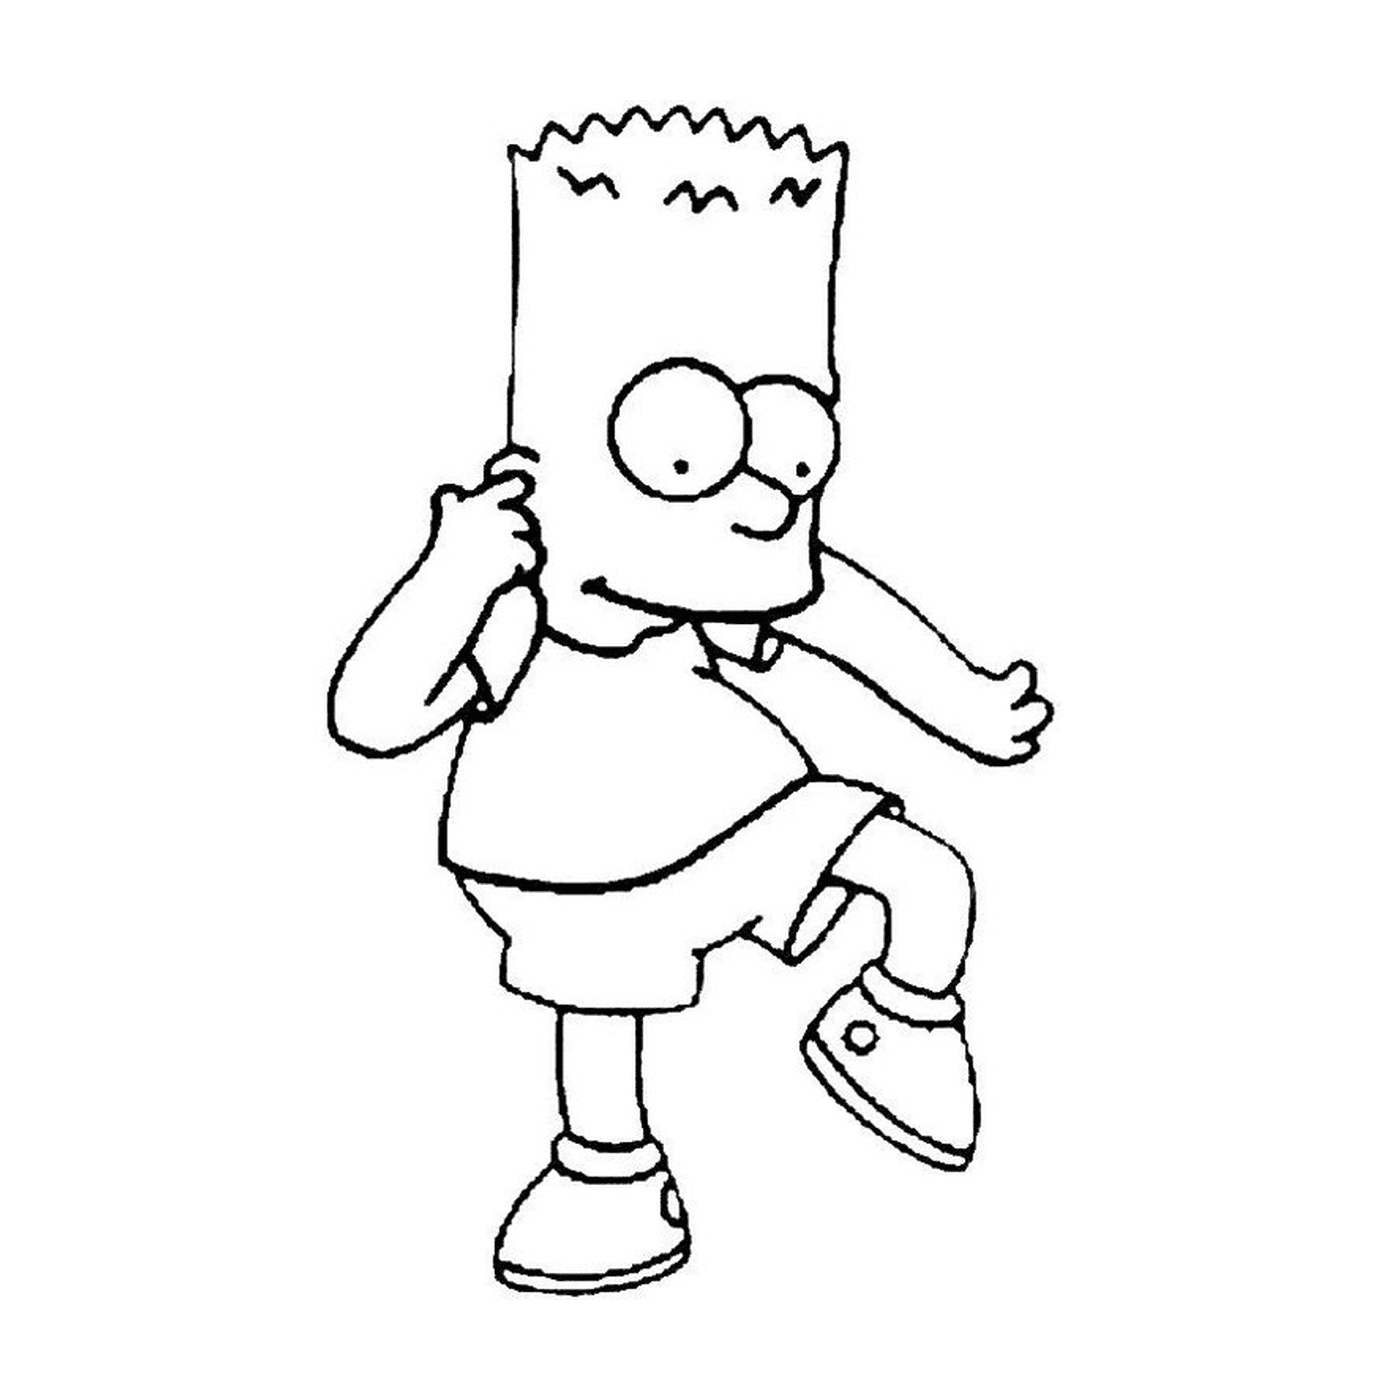  Bart Simpson on a computer 